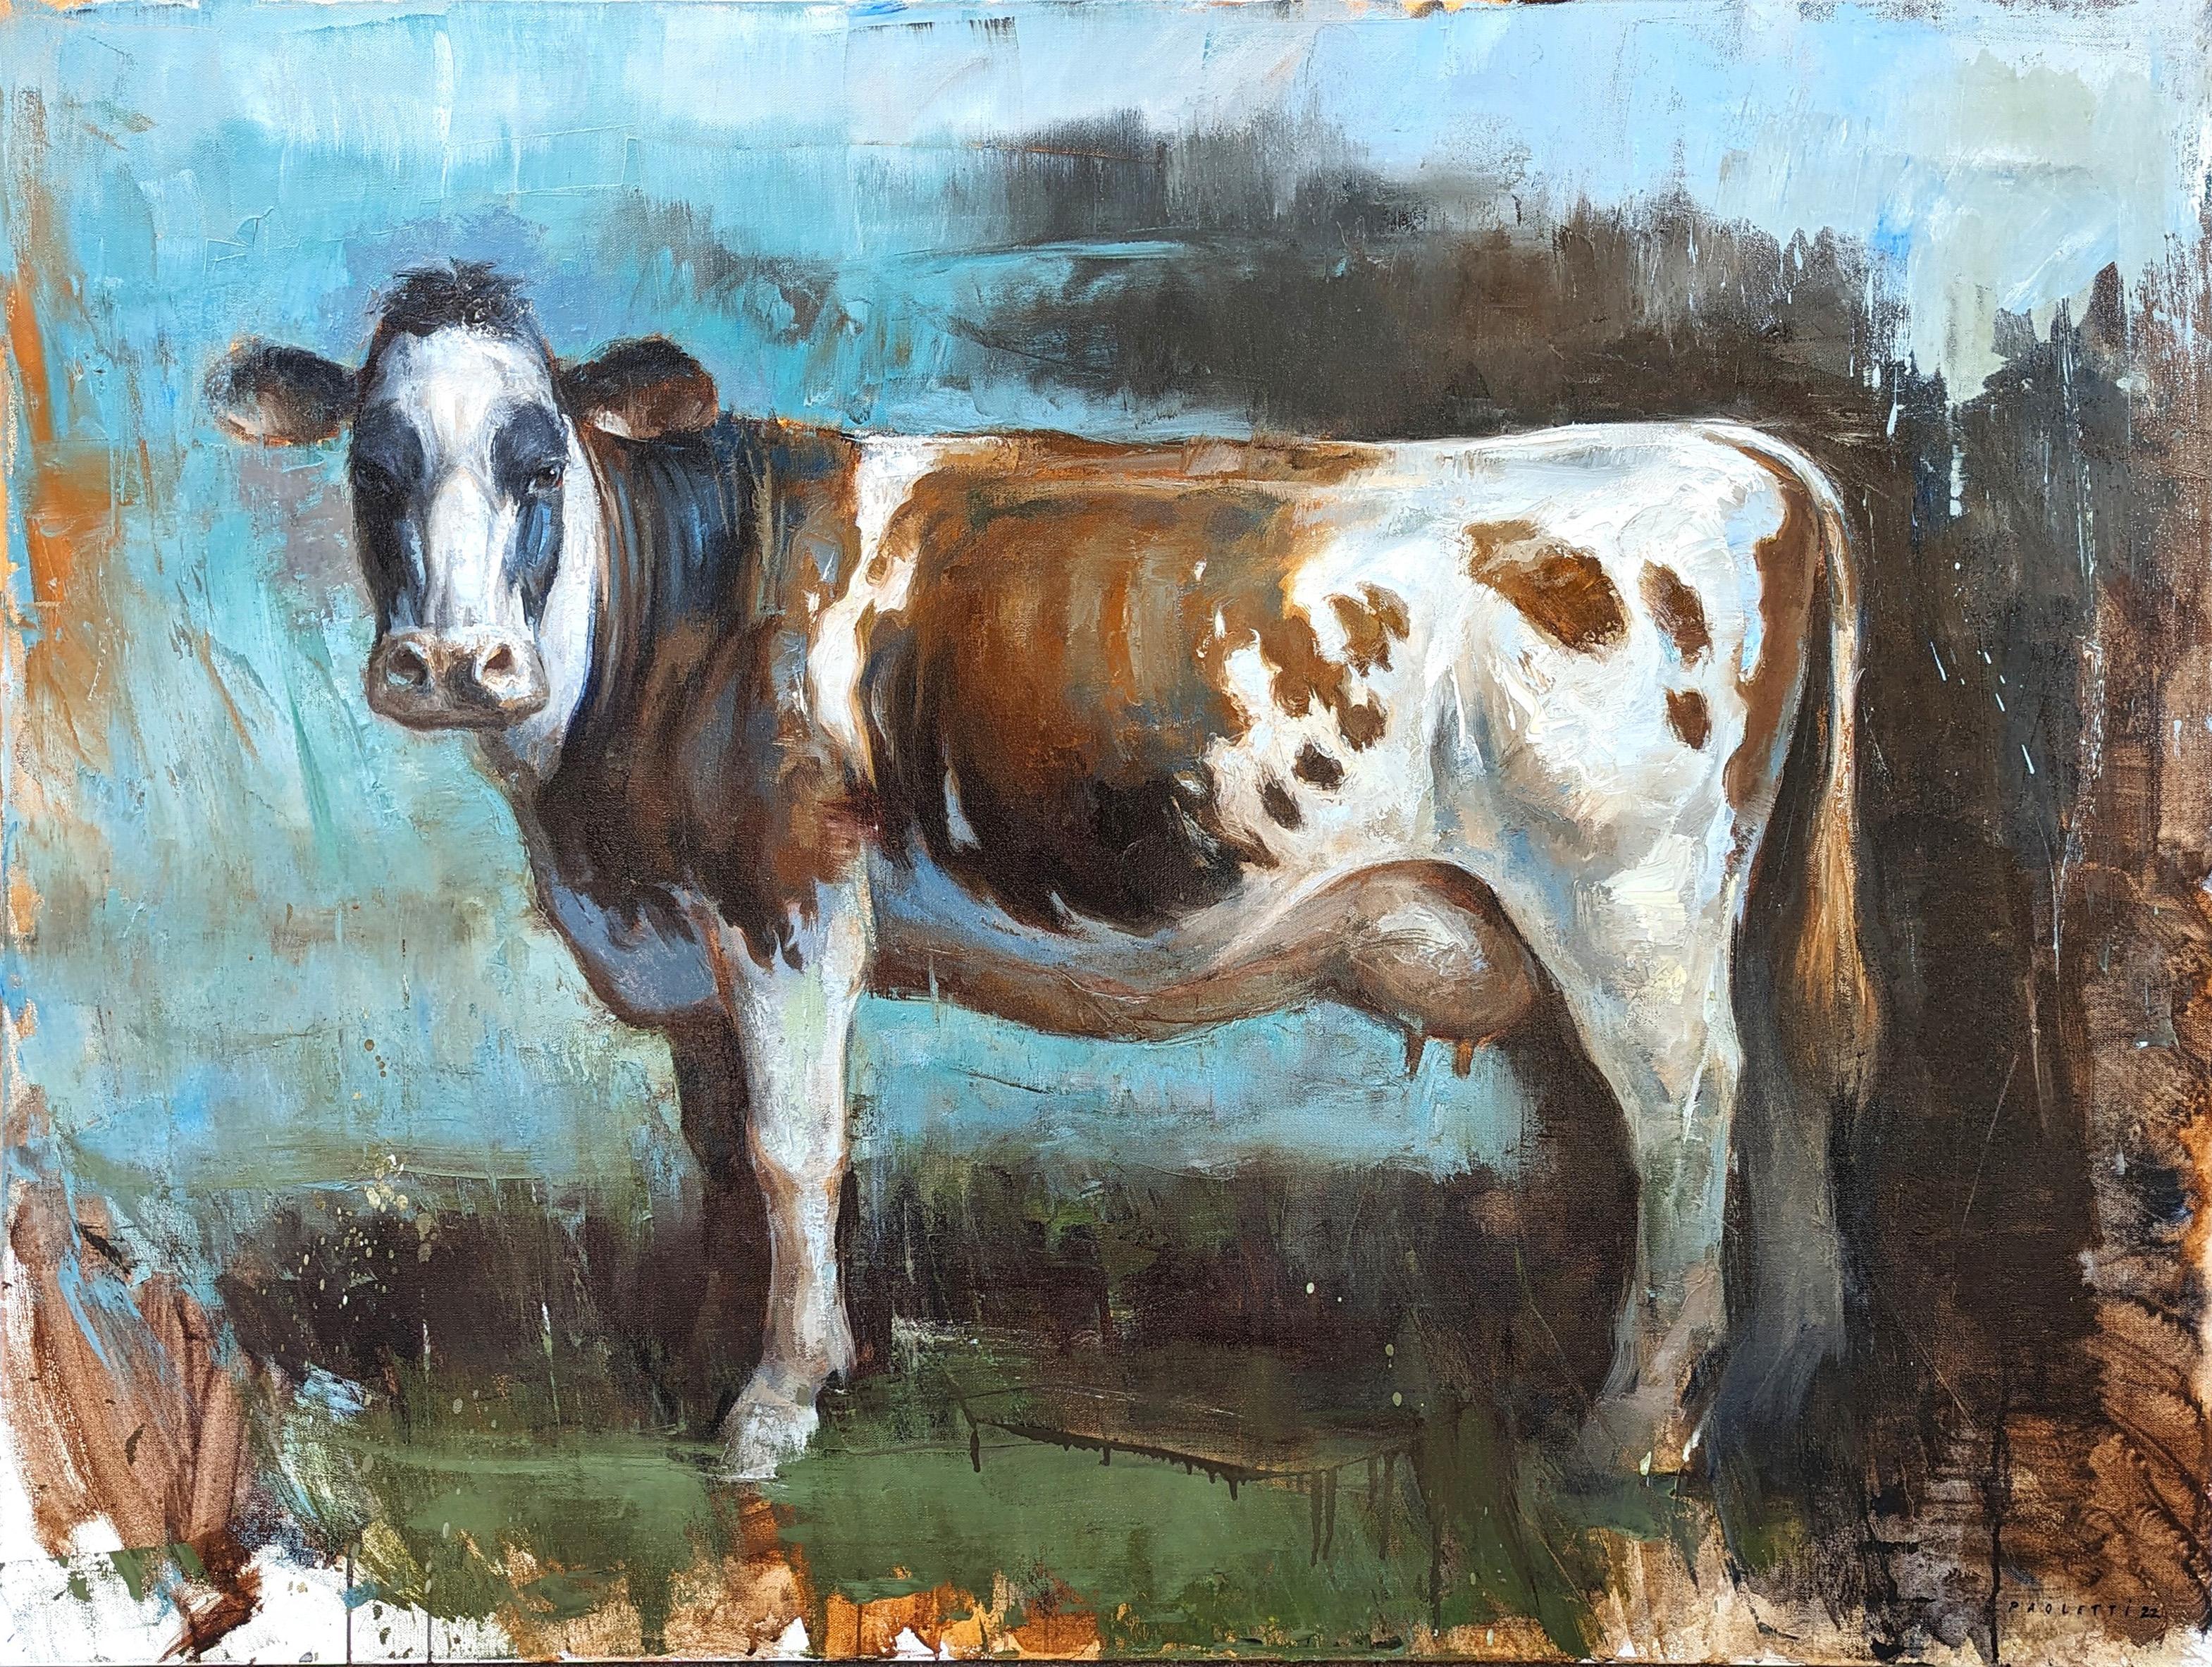 Matthew Paoletti Abstract Painting - "Spotted" Contemporary Naturalistic Rural Animal Painting of a Brown Cow